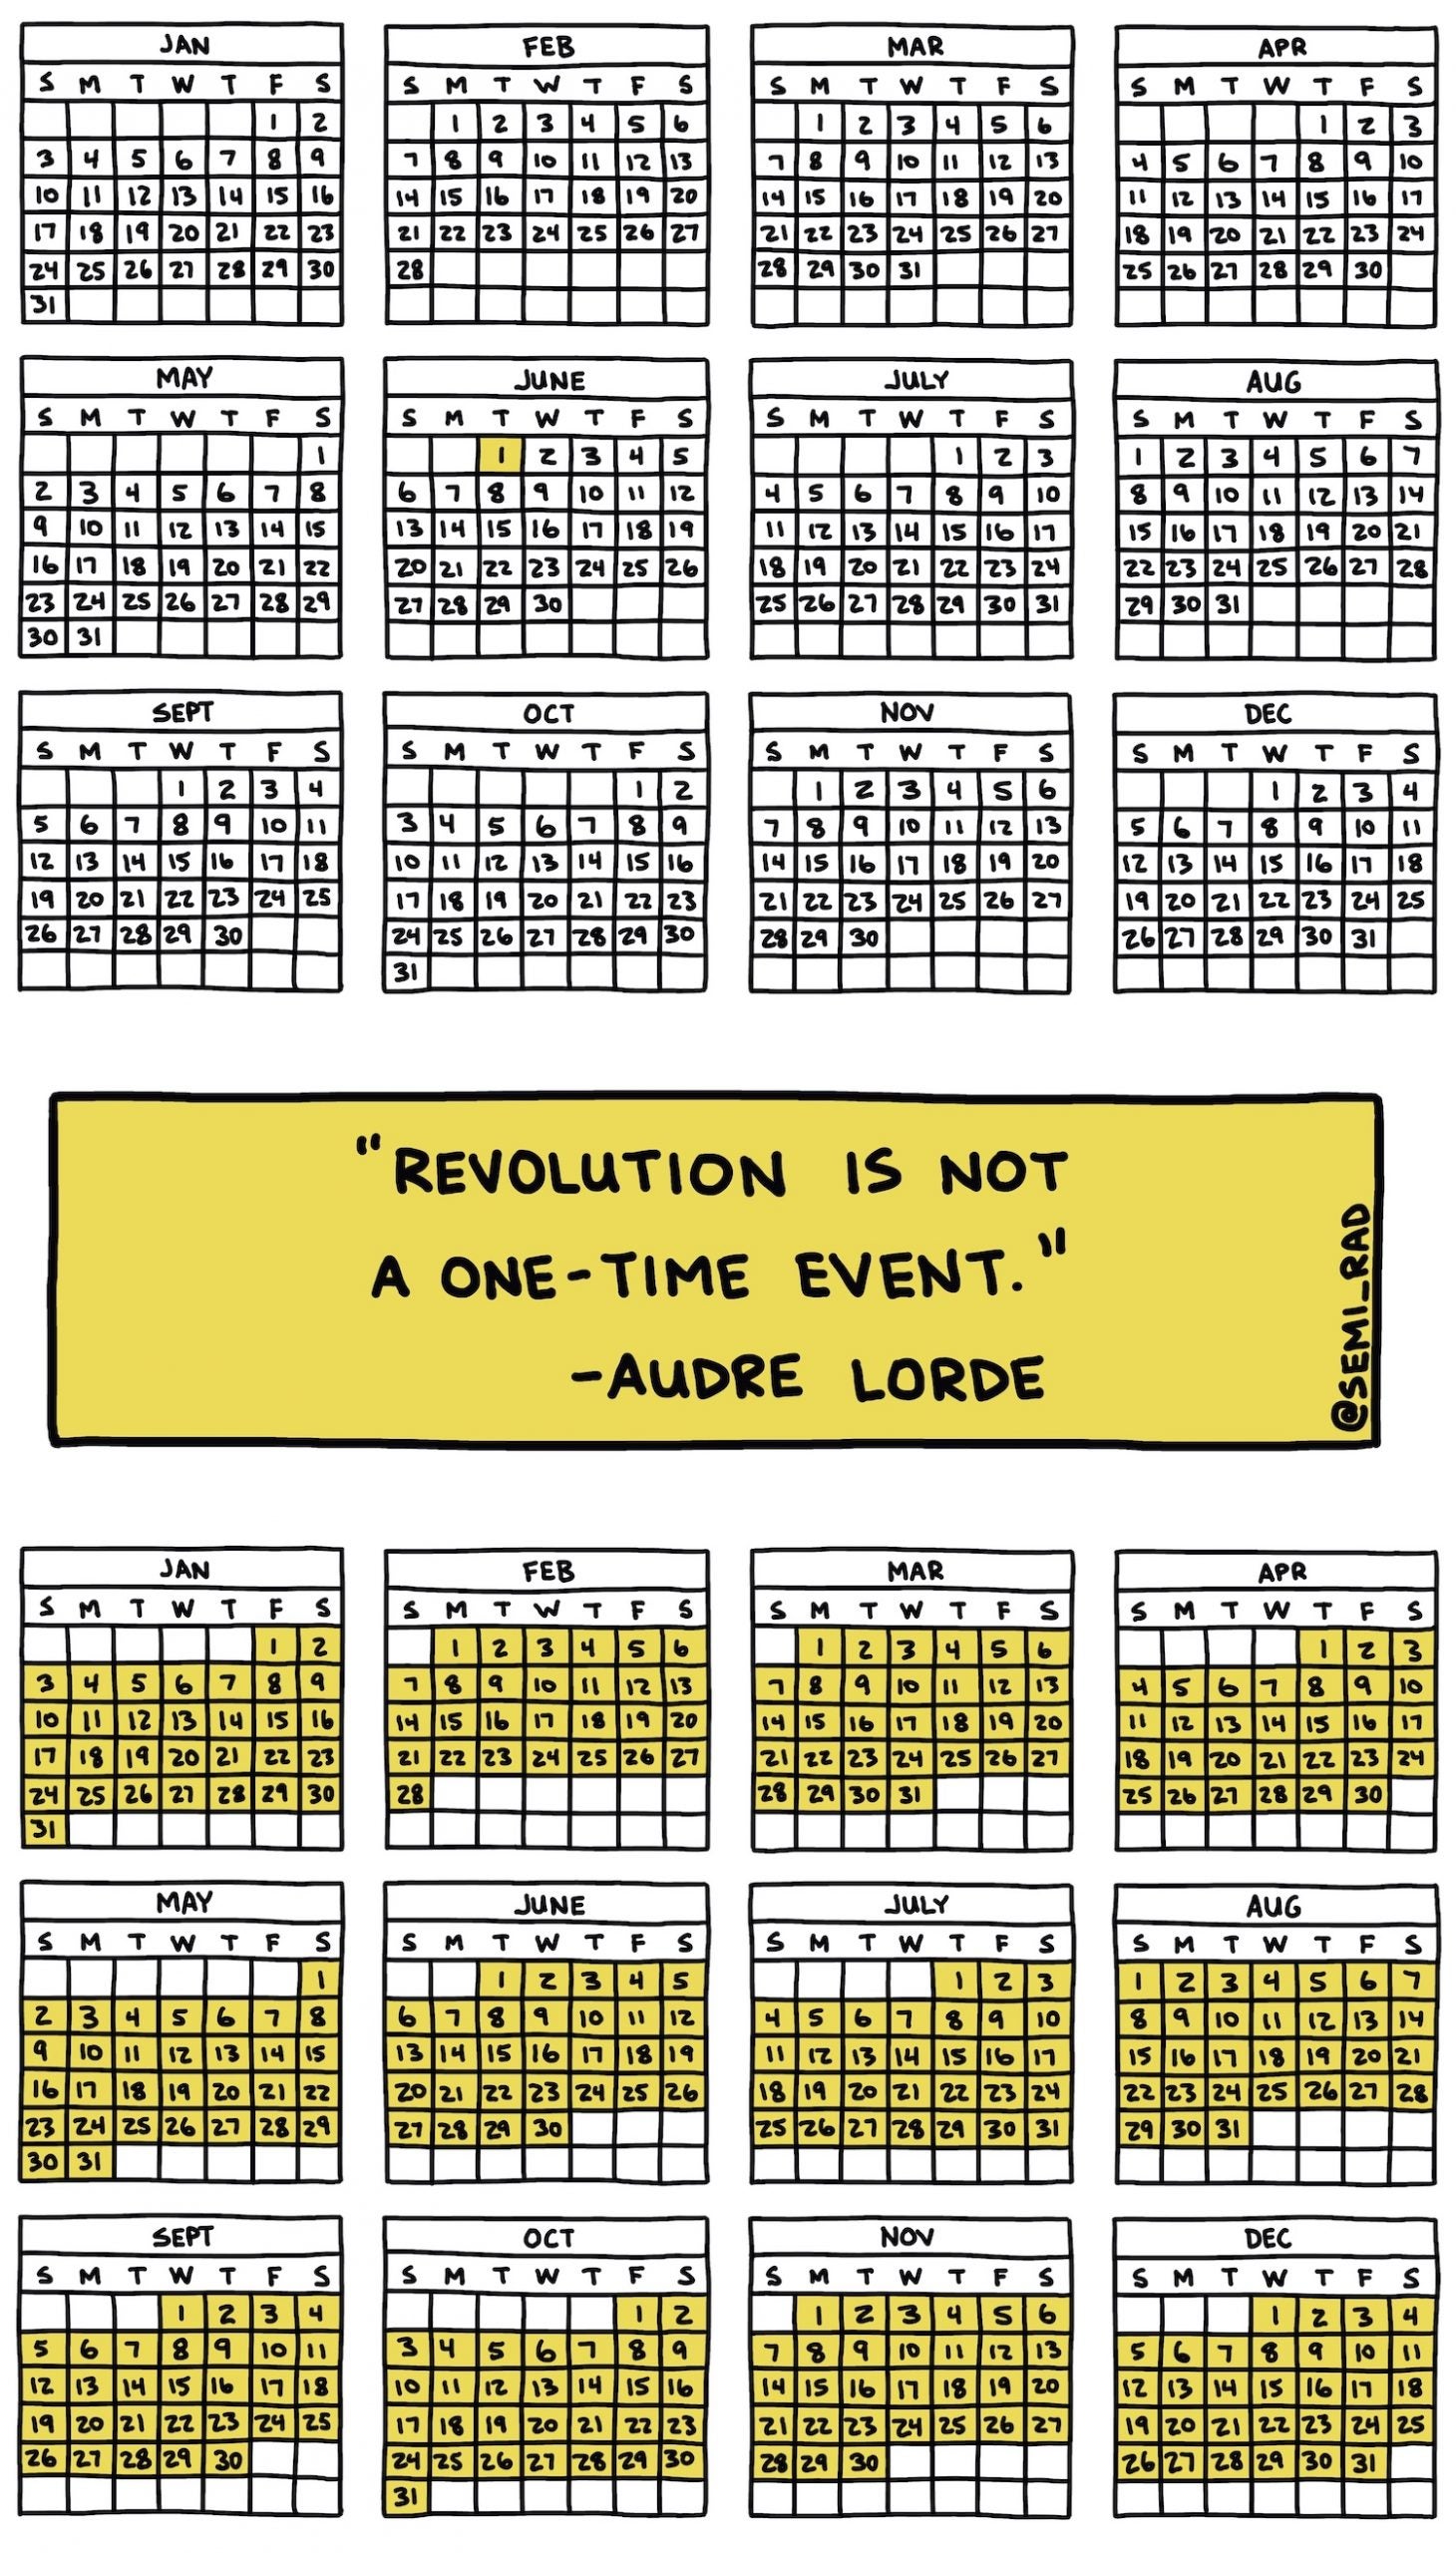 many calendars that show action should be everyday not just one, with an Audre Lorde quote